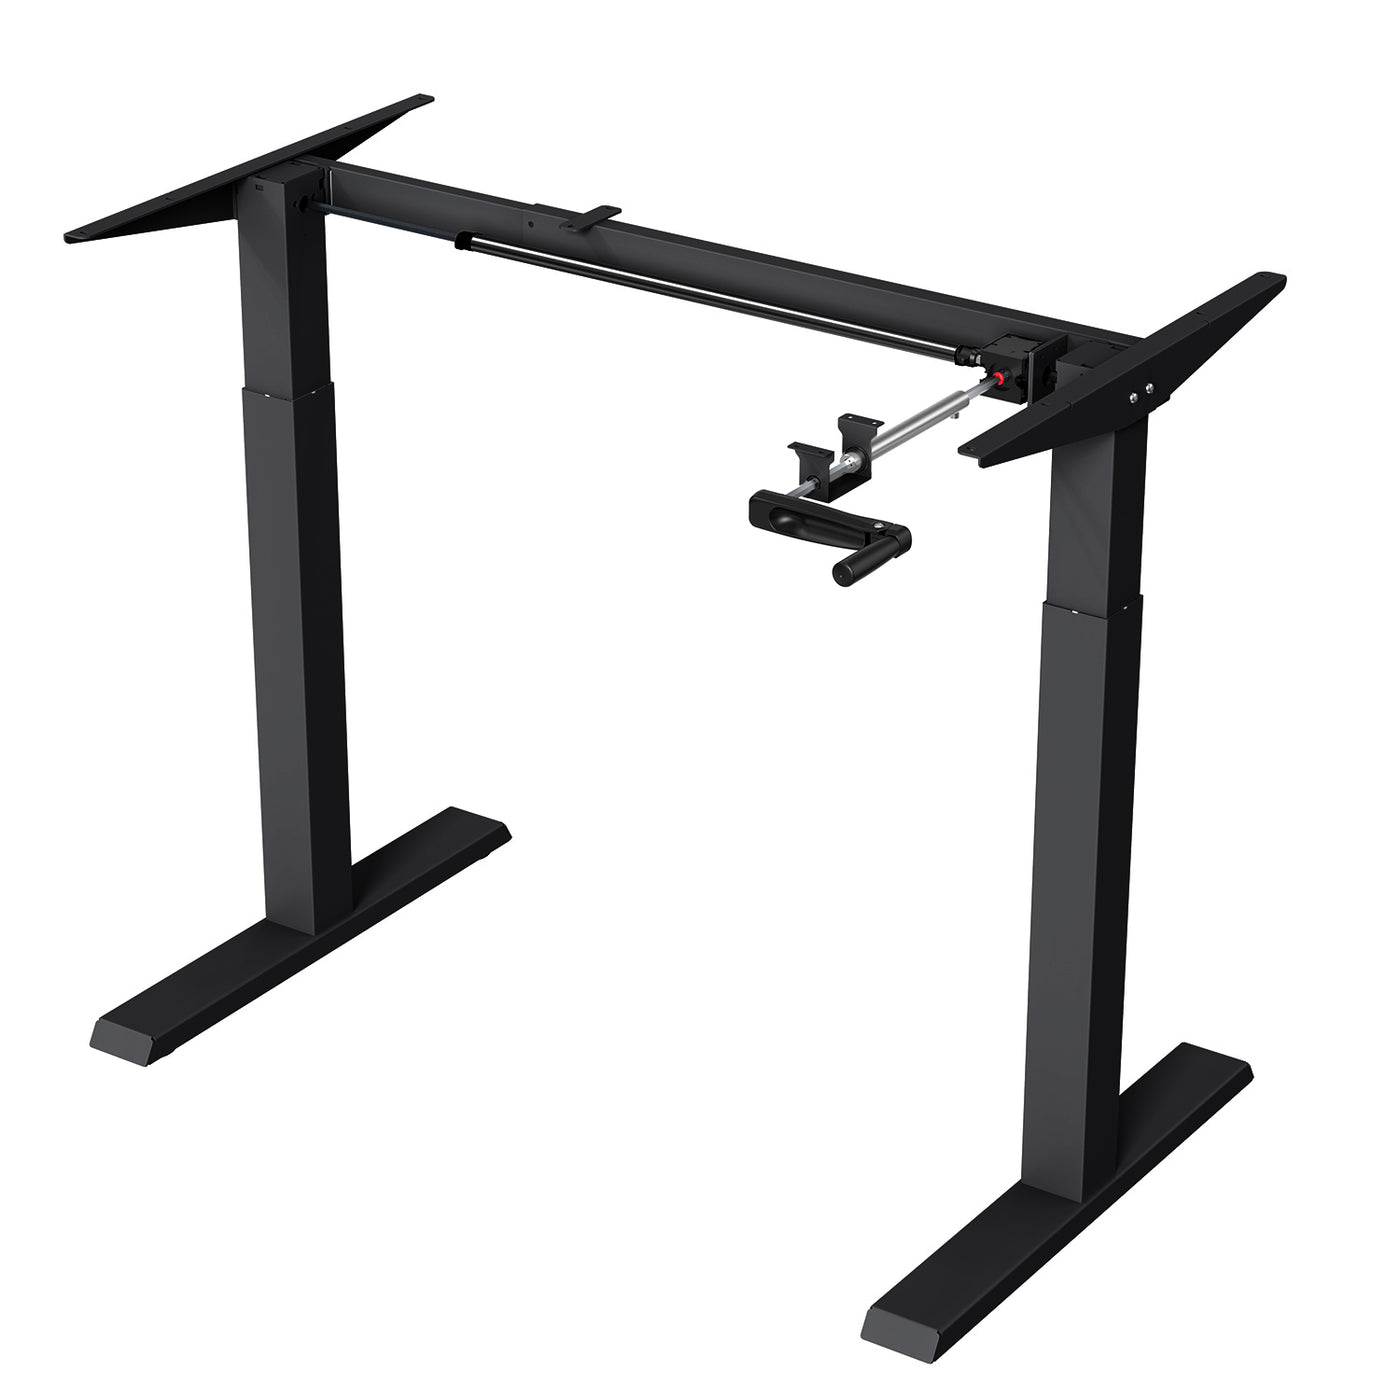 Ergo Office ER-402B Manual Height Adjustment Desk Table Frame Without Top for Standing and Sitting Work Black